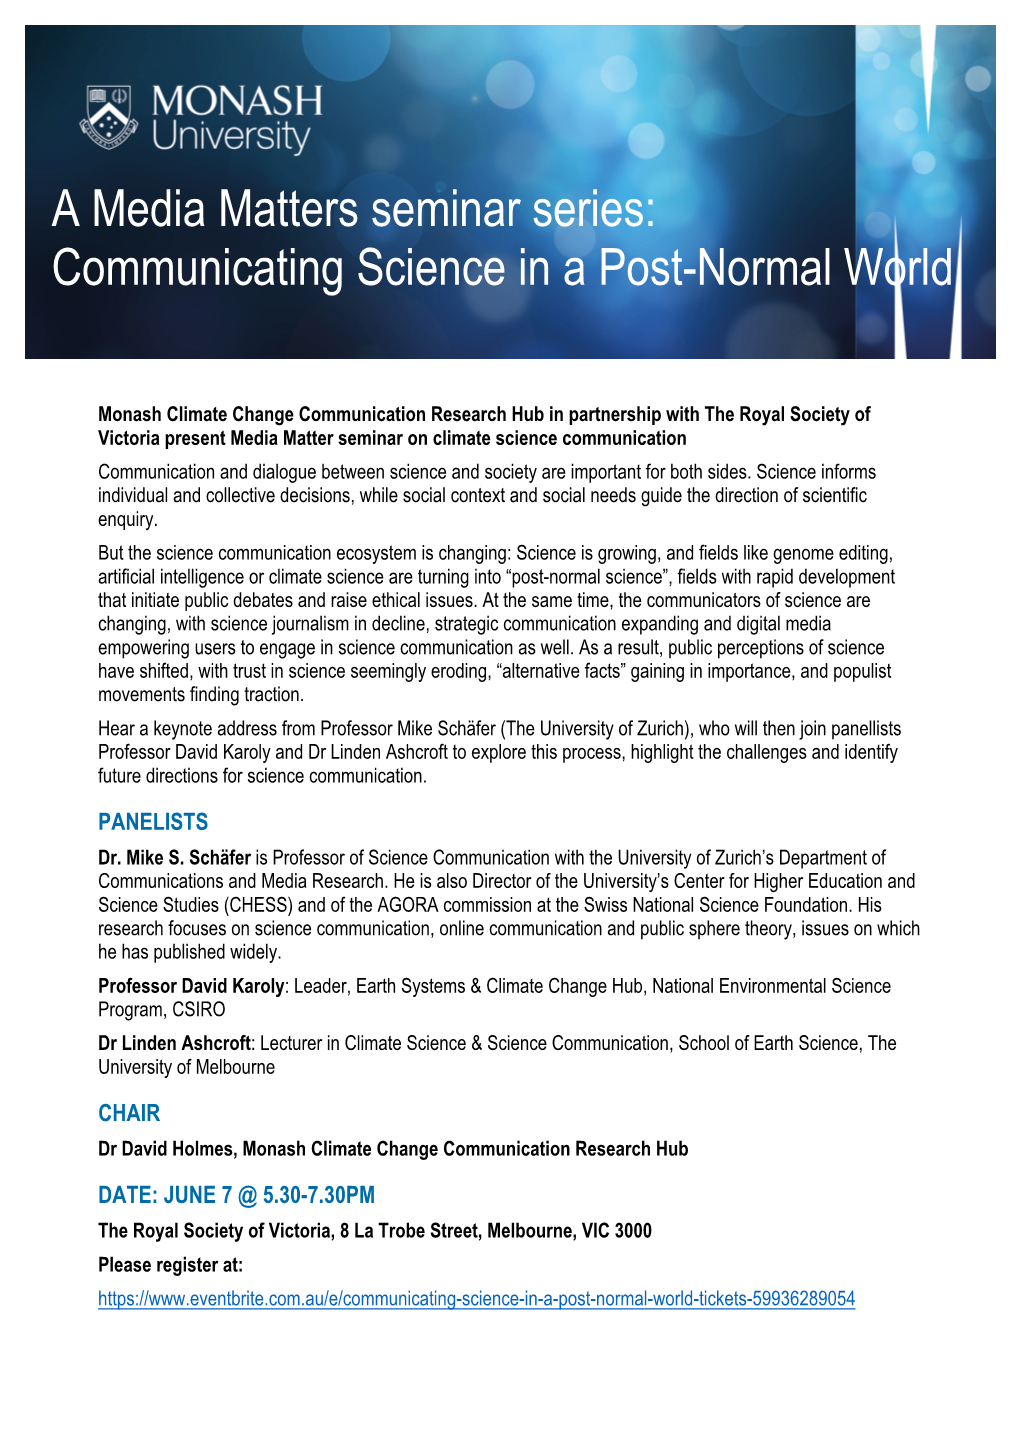 A Media Matters Seminar Series: Communicating Science in a Post-Normal World